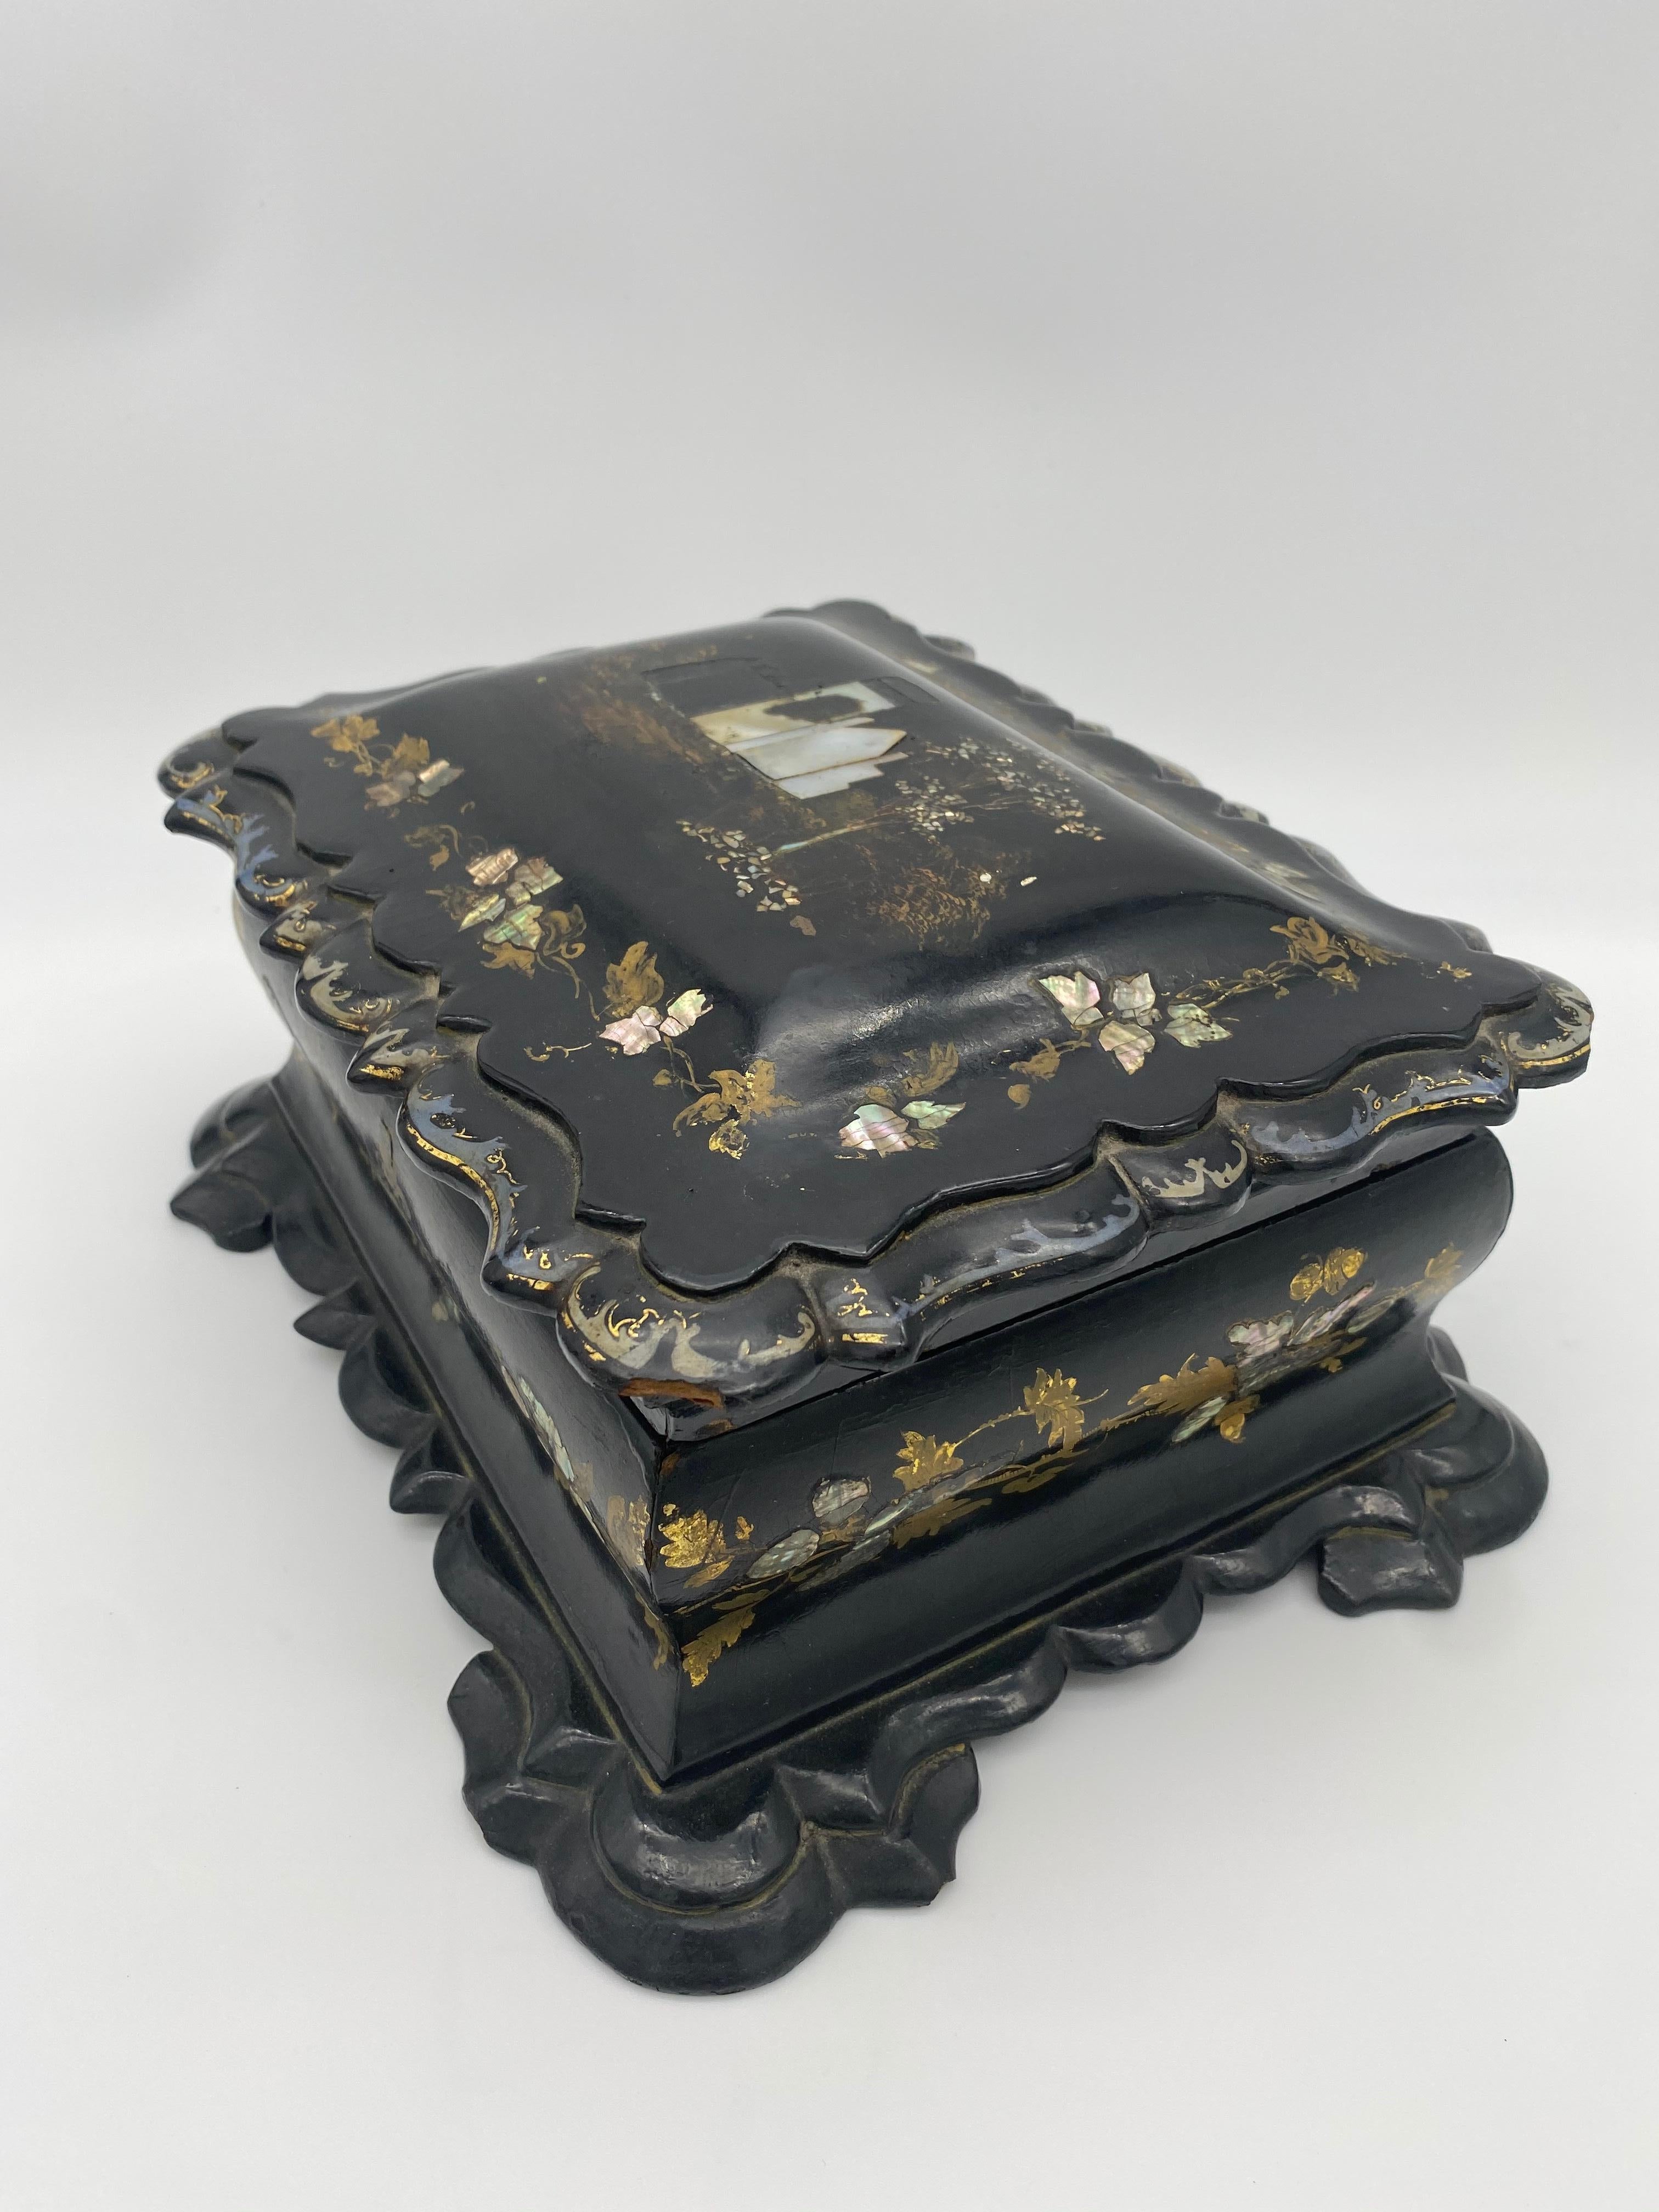 19th Century Chinese Black Lacquer Tea Caddy In Good Condition For Sale In Brea, CA